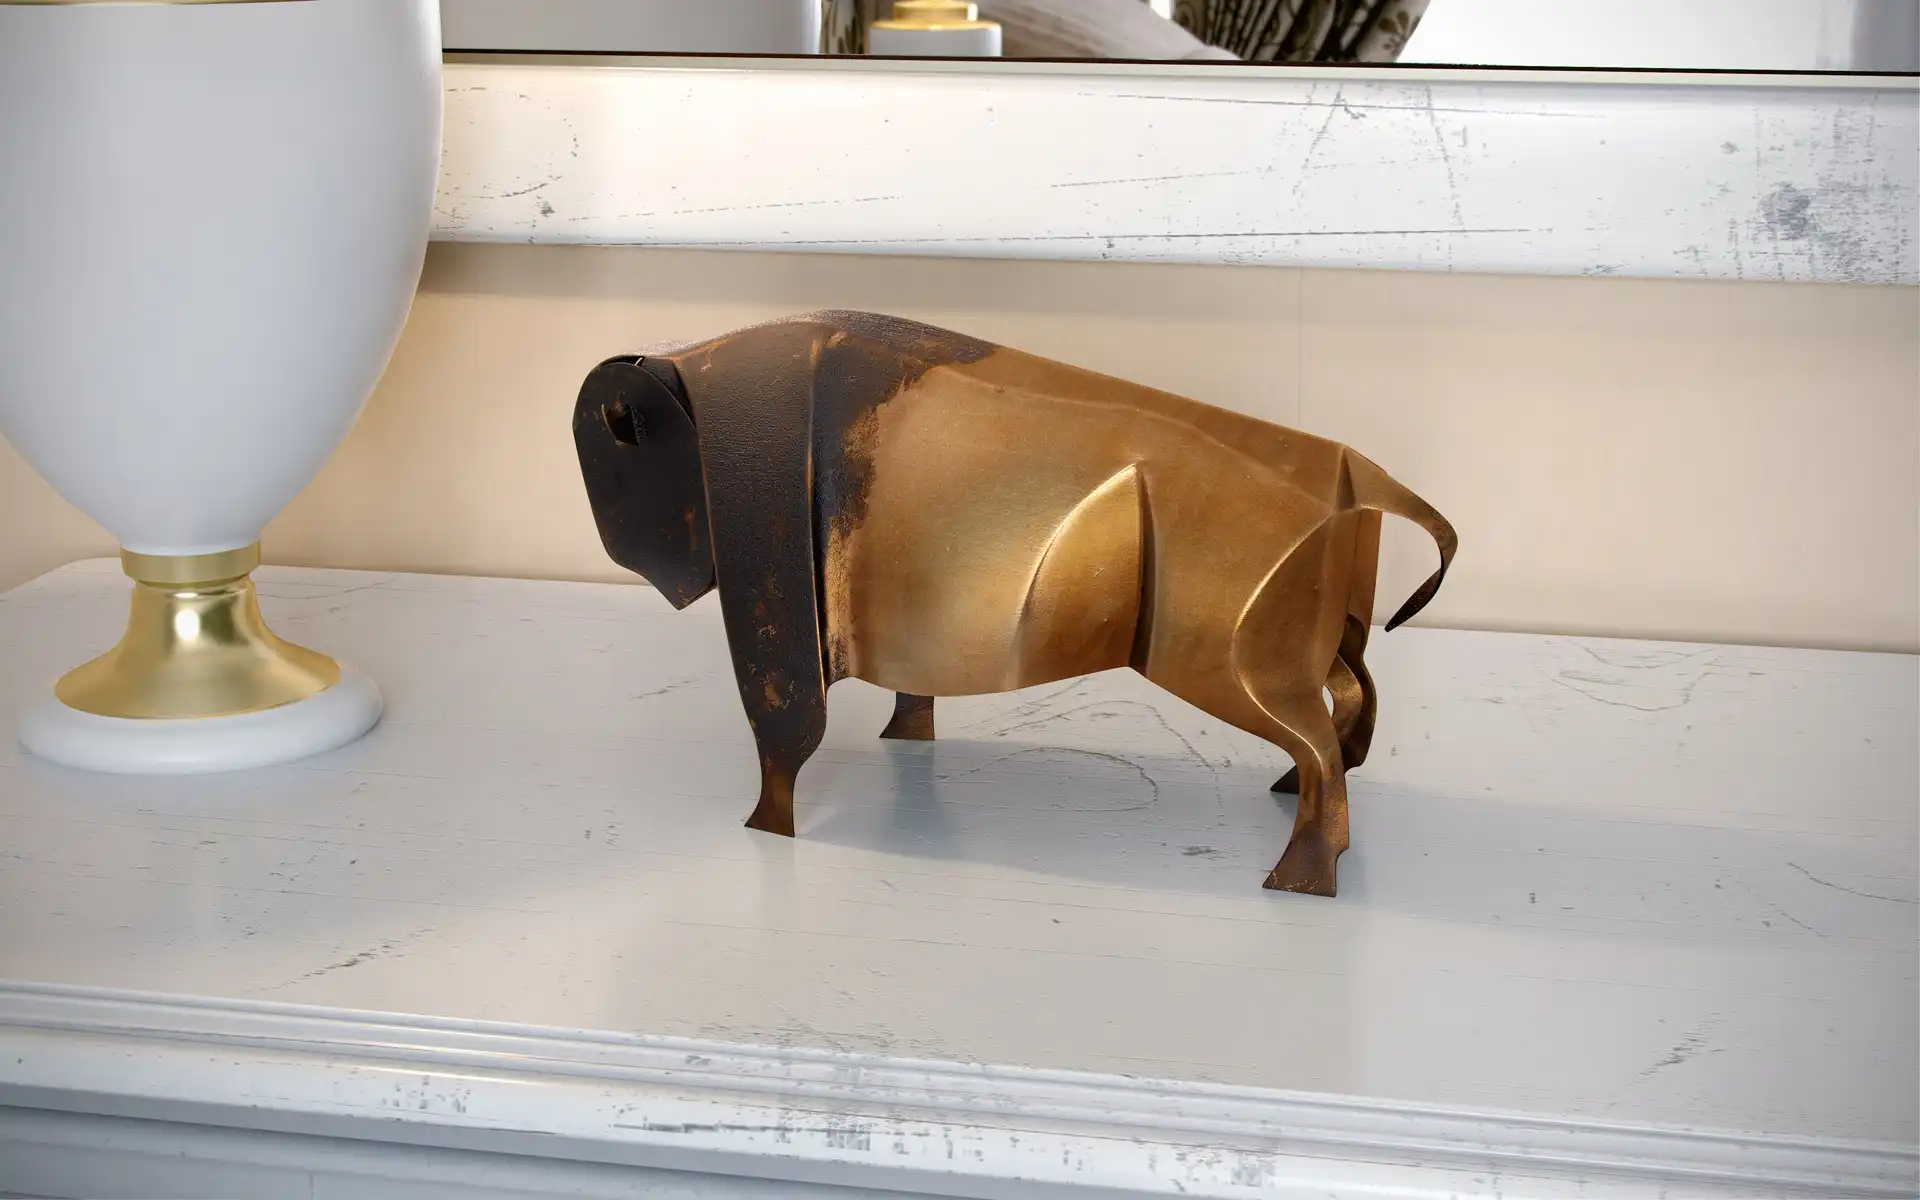 Photorealistic 3d visualization of a copper buffalo statuette 3D model that turned back and standing on a shelf.